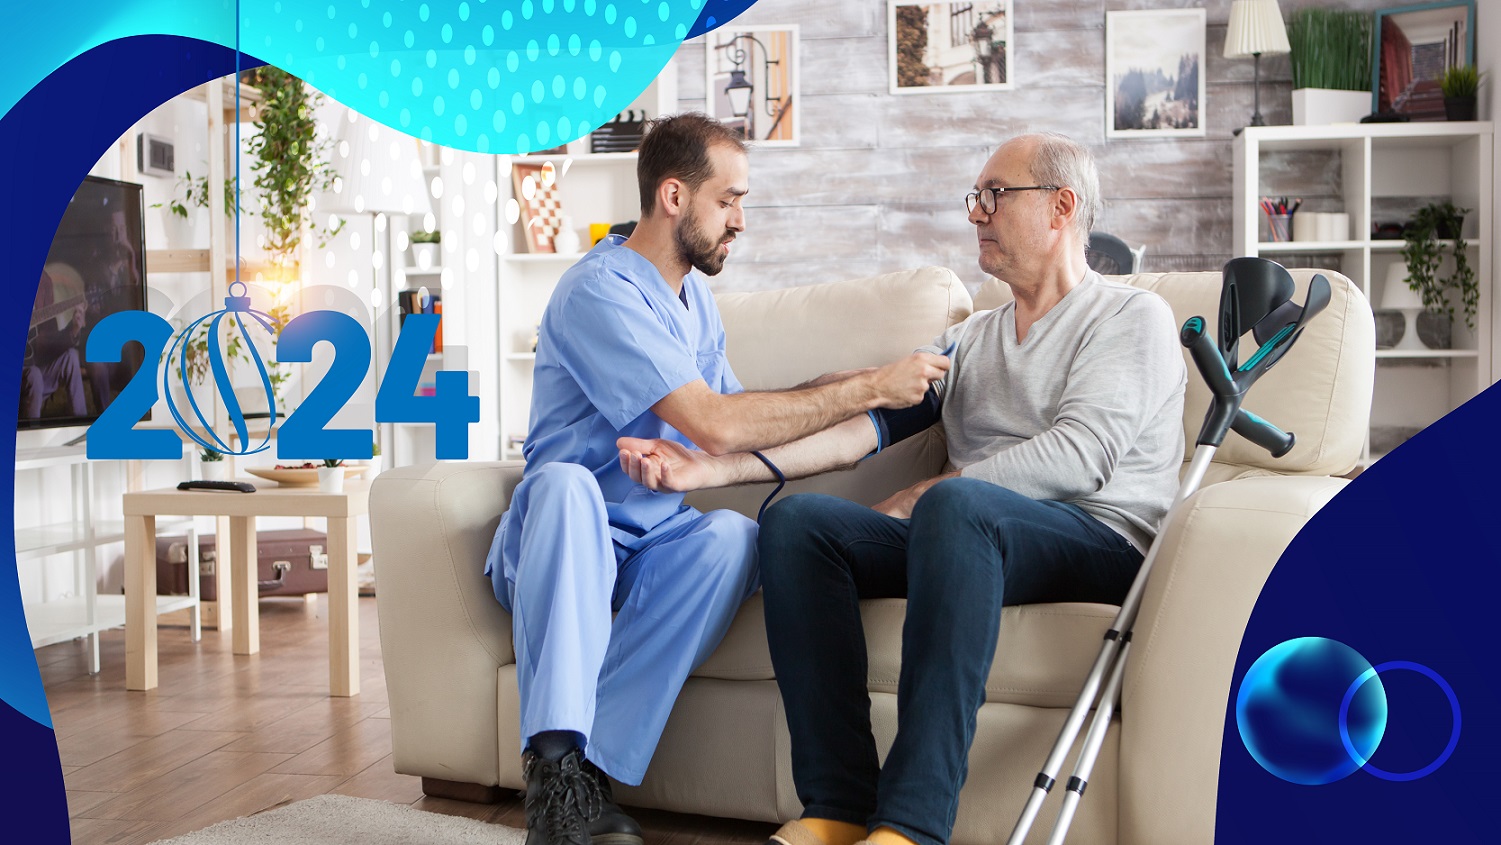 At-home services and personal tests will dominate patient care in 2024